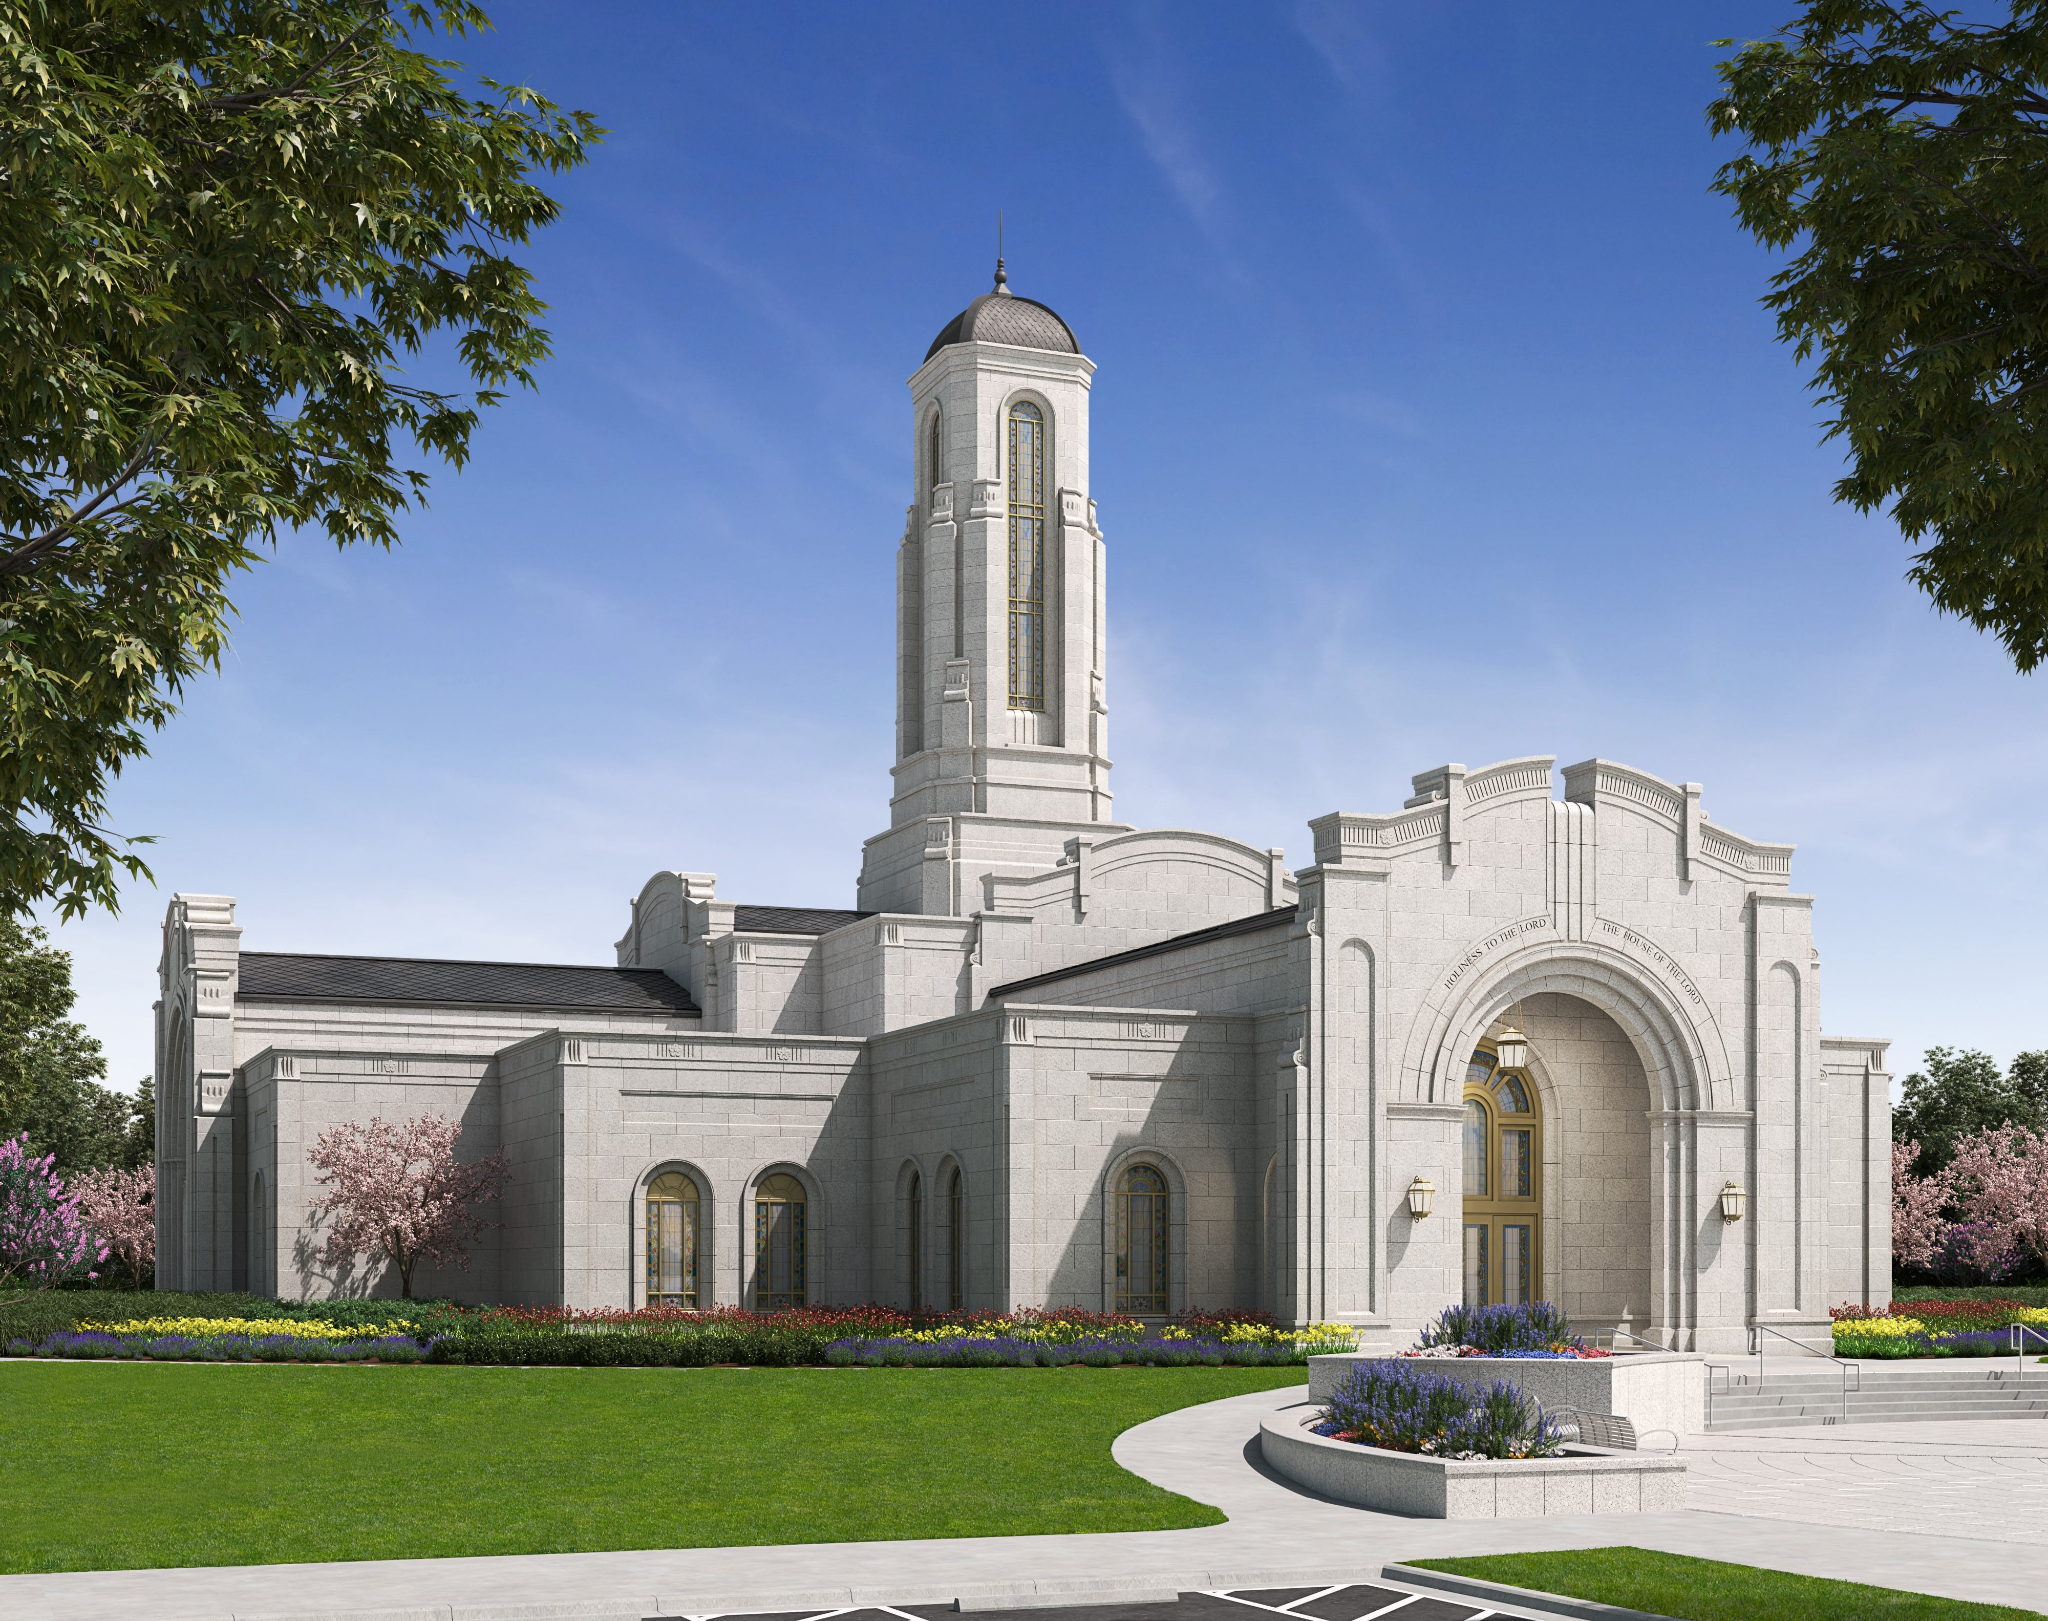 A rendering of the Modesto temple, a white single-story building with several arched windows around the exterior and a tall, thin tower above the center.